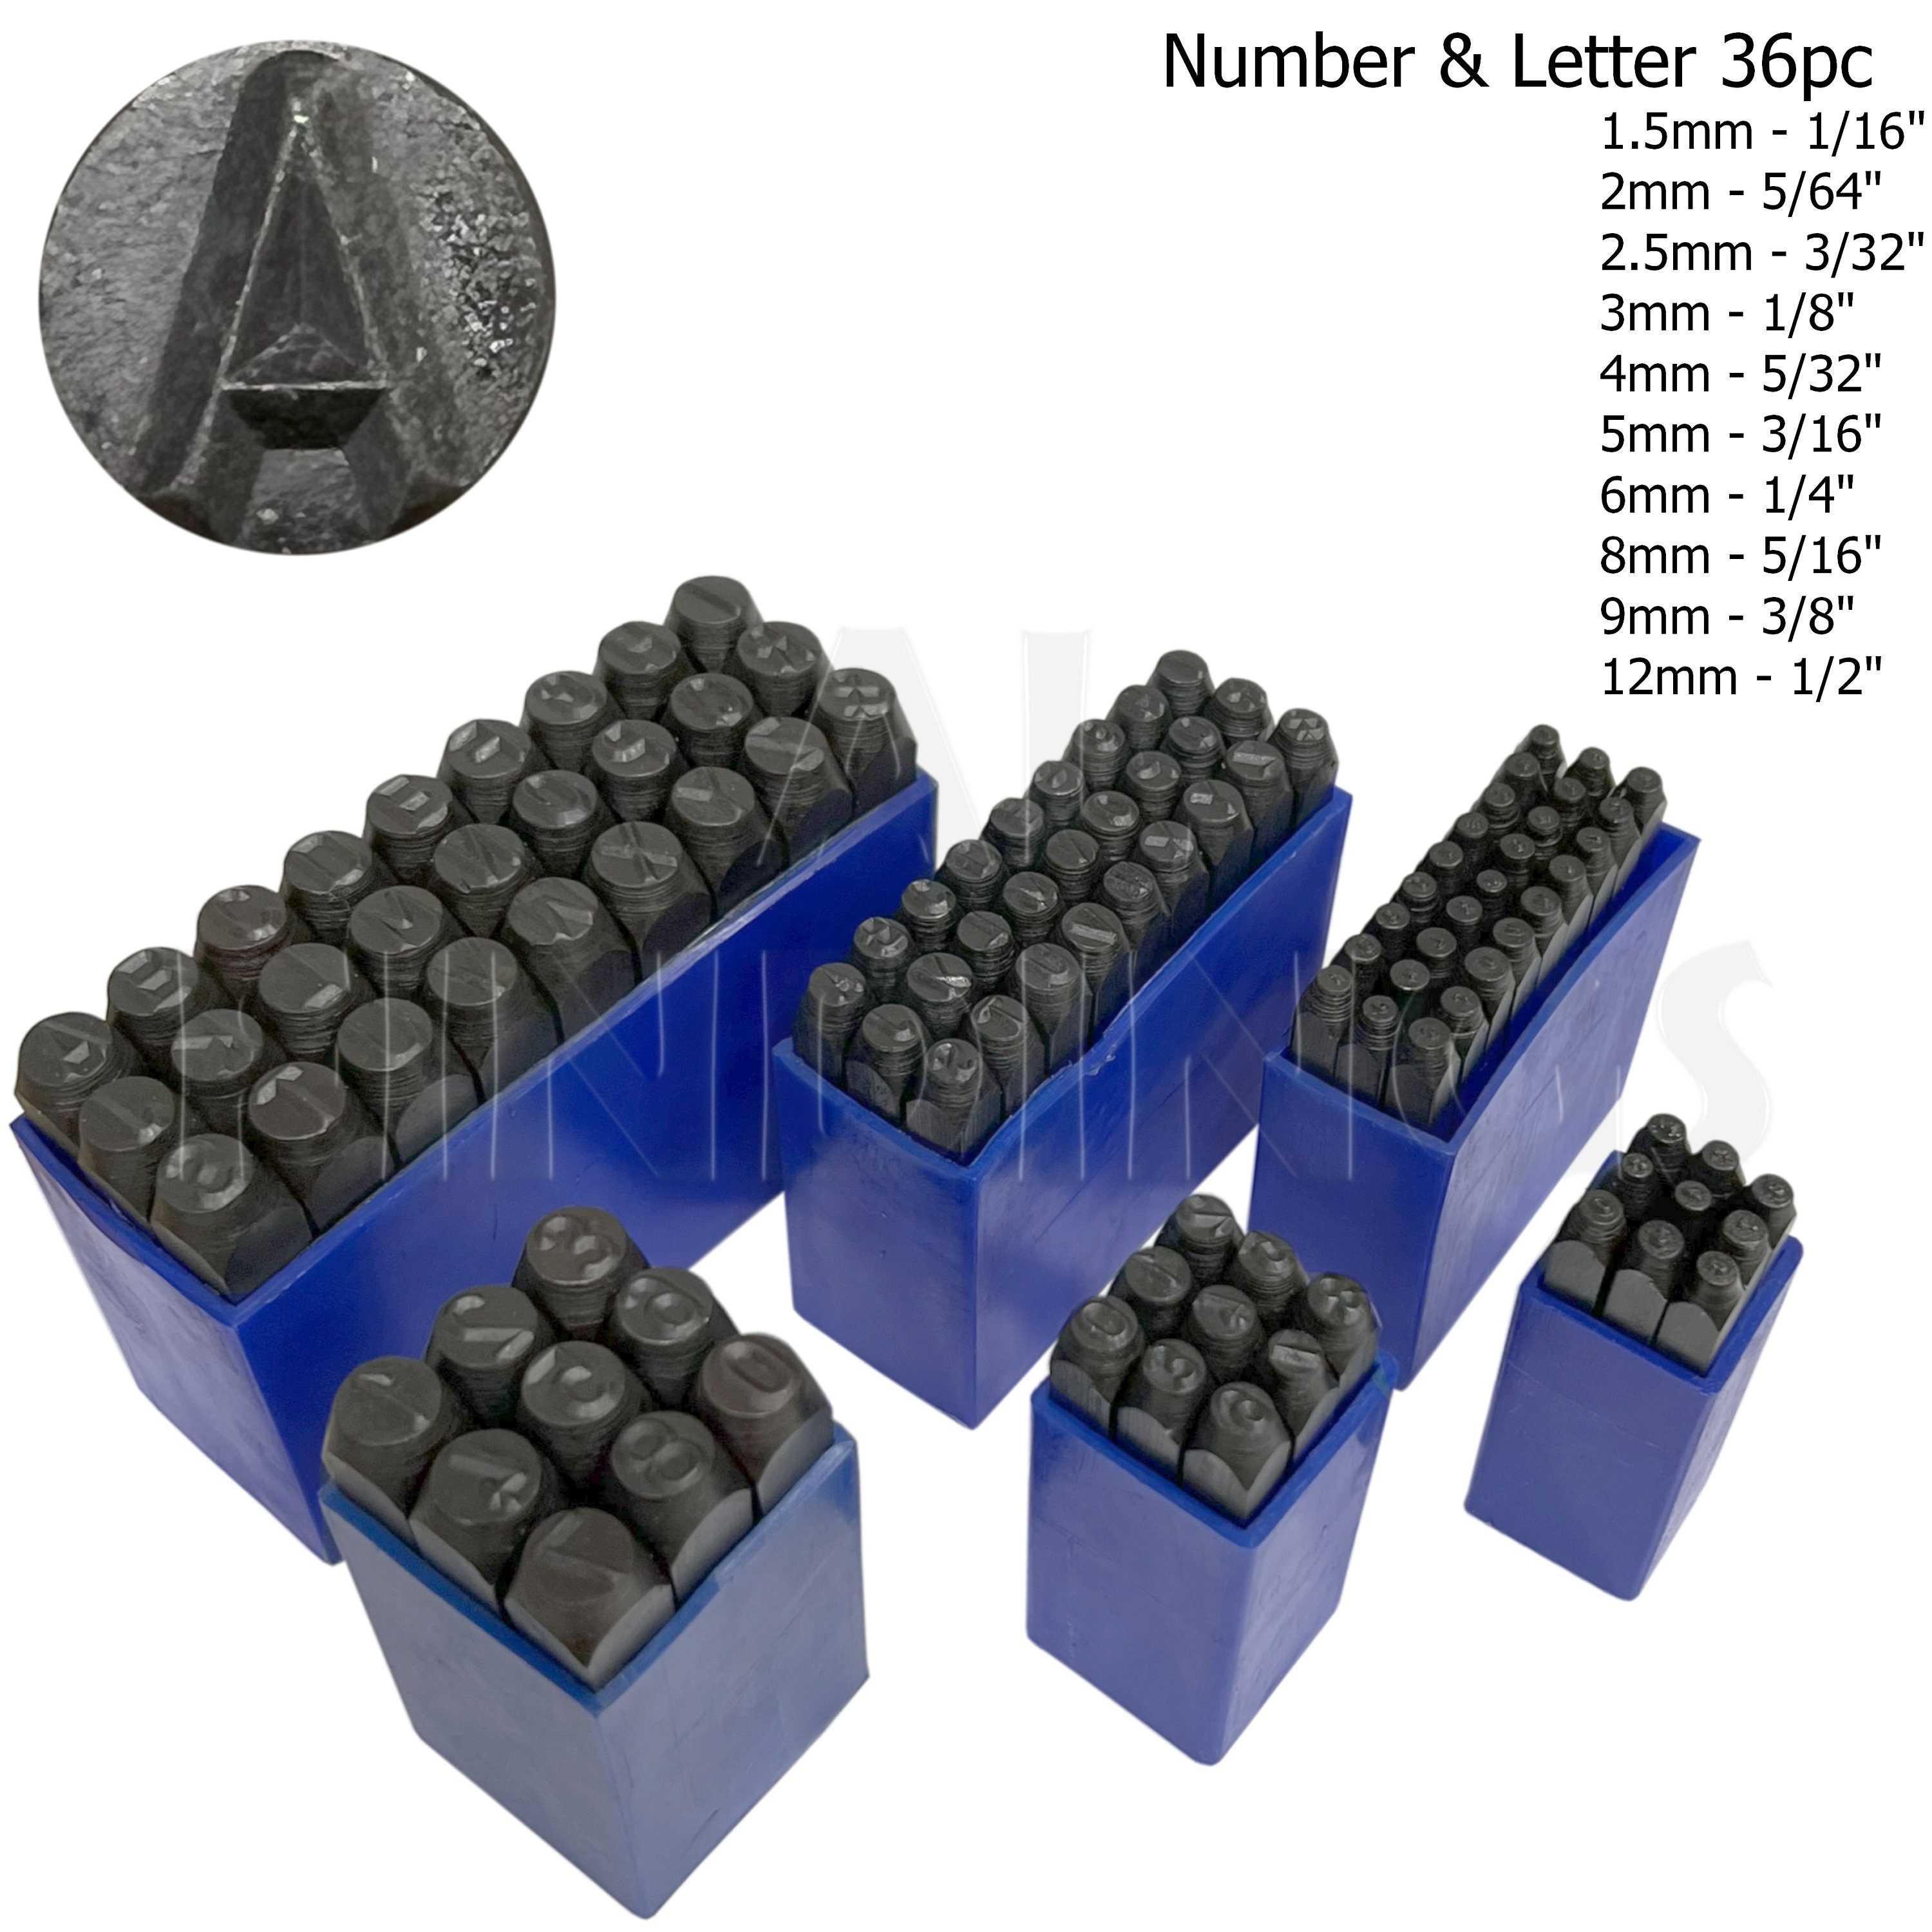 HORUSDY 37-Piece Number and Letter Stamp Set 1/4 (6mm) (A-Z & 0-9 + Stars)  Punch Perfect for Imprinting Metal Stamping kit, Plastic, Wood, Leather